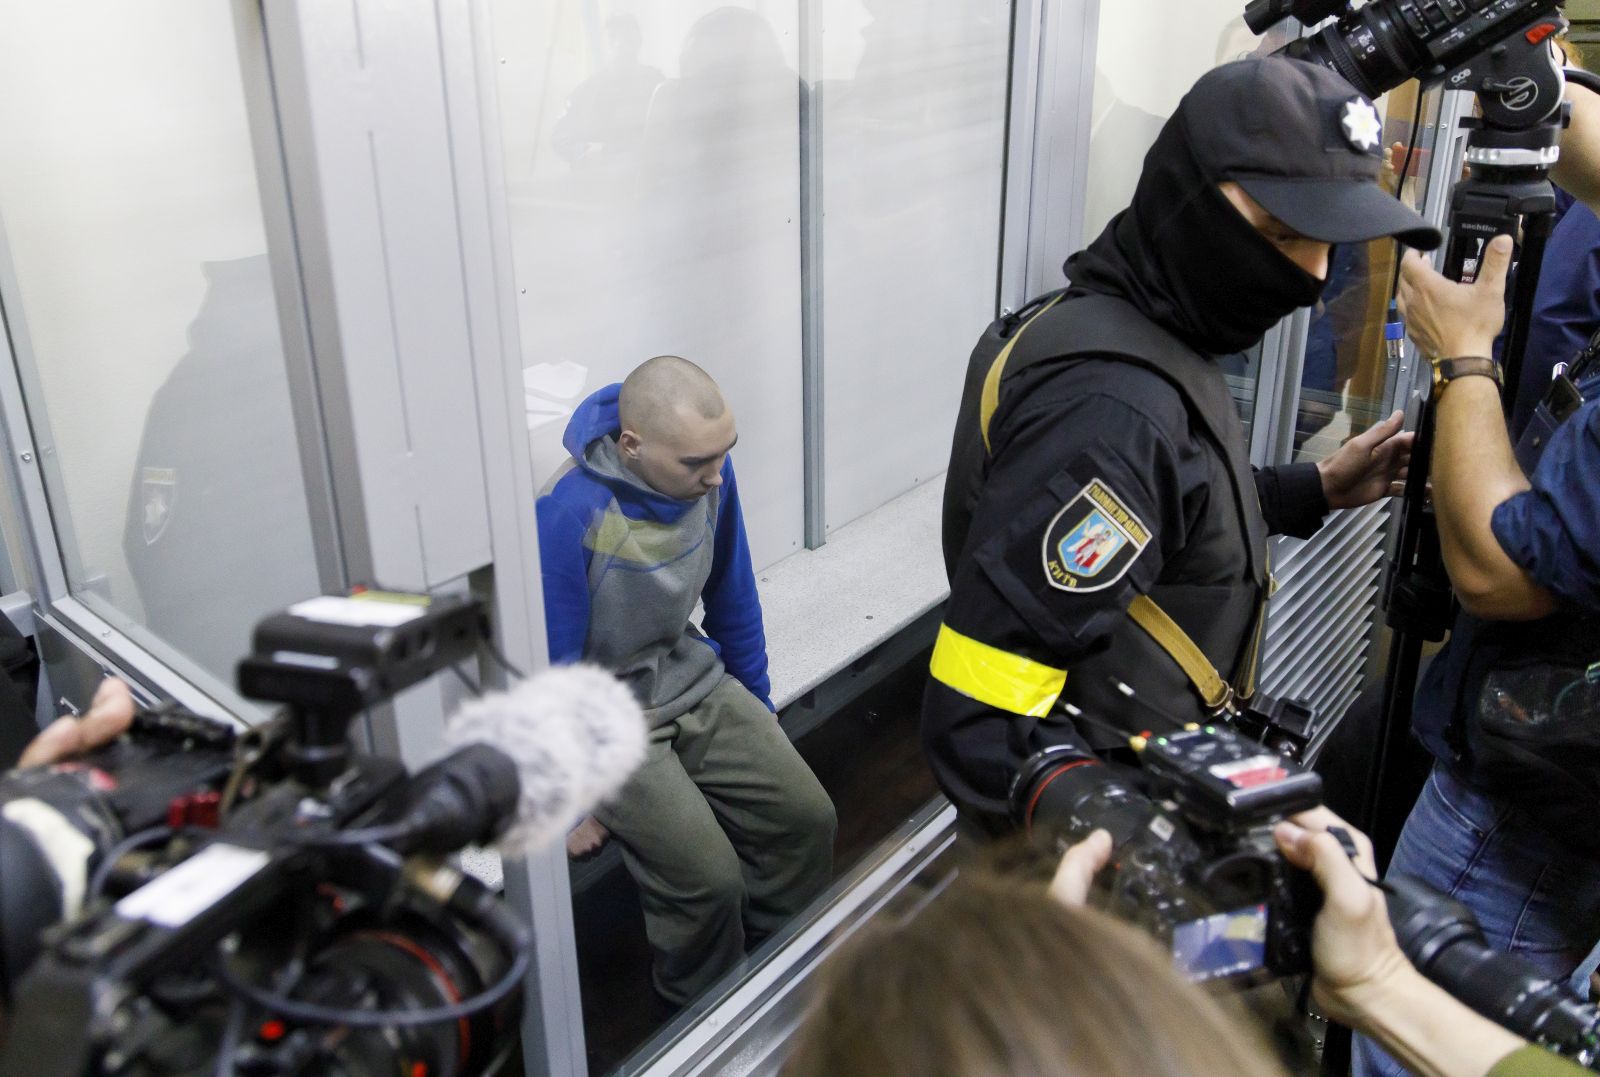 epa09944451 Russian serviceman Vadim Shishimarin (C) attends a court hearing in the Solomyansky district court in Kyiv, Ukraine, 13 May 2022. Vadim Shishimarin (21) is accused of killing an unarmed 62-year-old civilian man as Shishimarin fled with four other soldiers near Chupakha village in the Sumy area. Ukraine is holding the first war crimes trial amid the Russian invasion. Shishimarin faces possible life imprisonment if found guilty as the prosecutor's general office said.  EPA/TANYA GORDIENKO